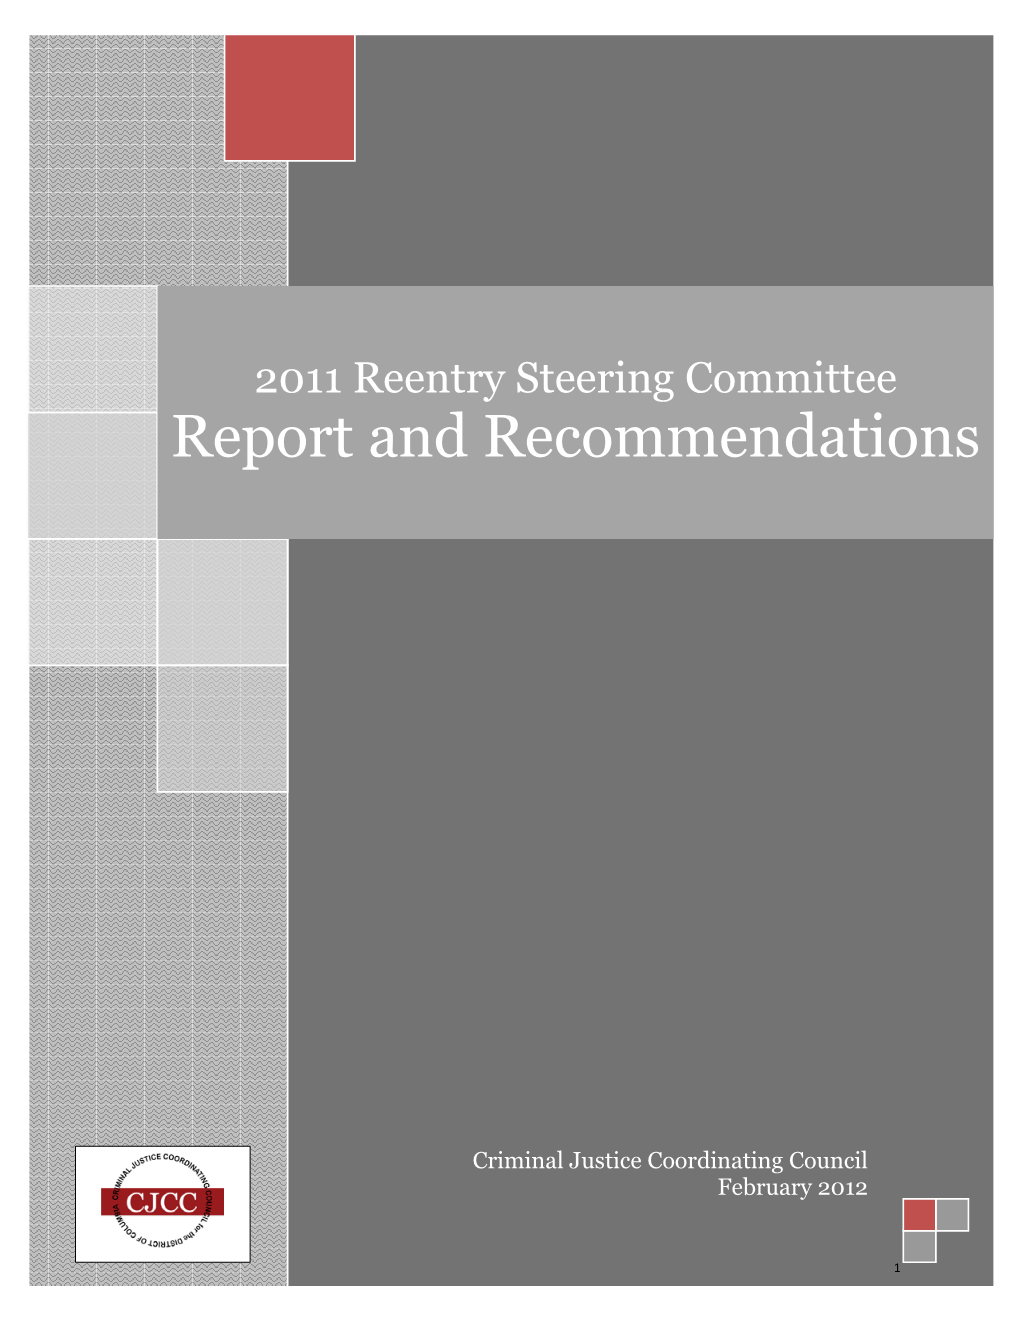 2011 Reentry Steering Committee Report and Recommendations